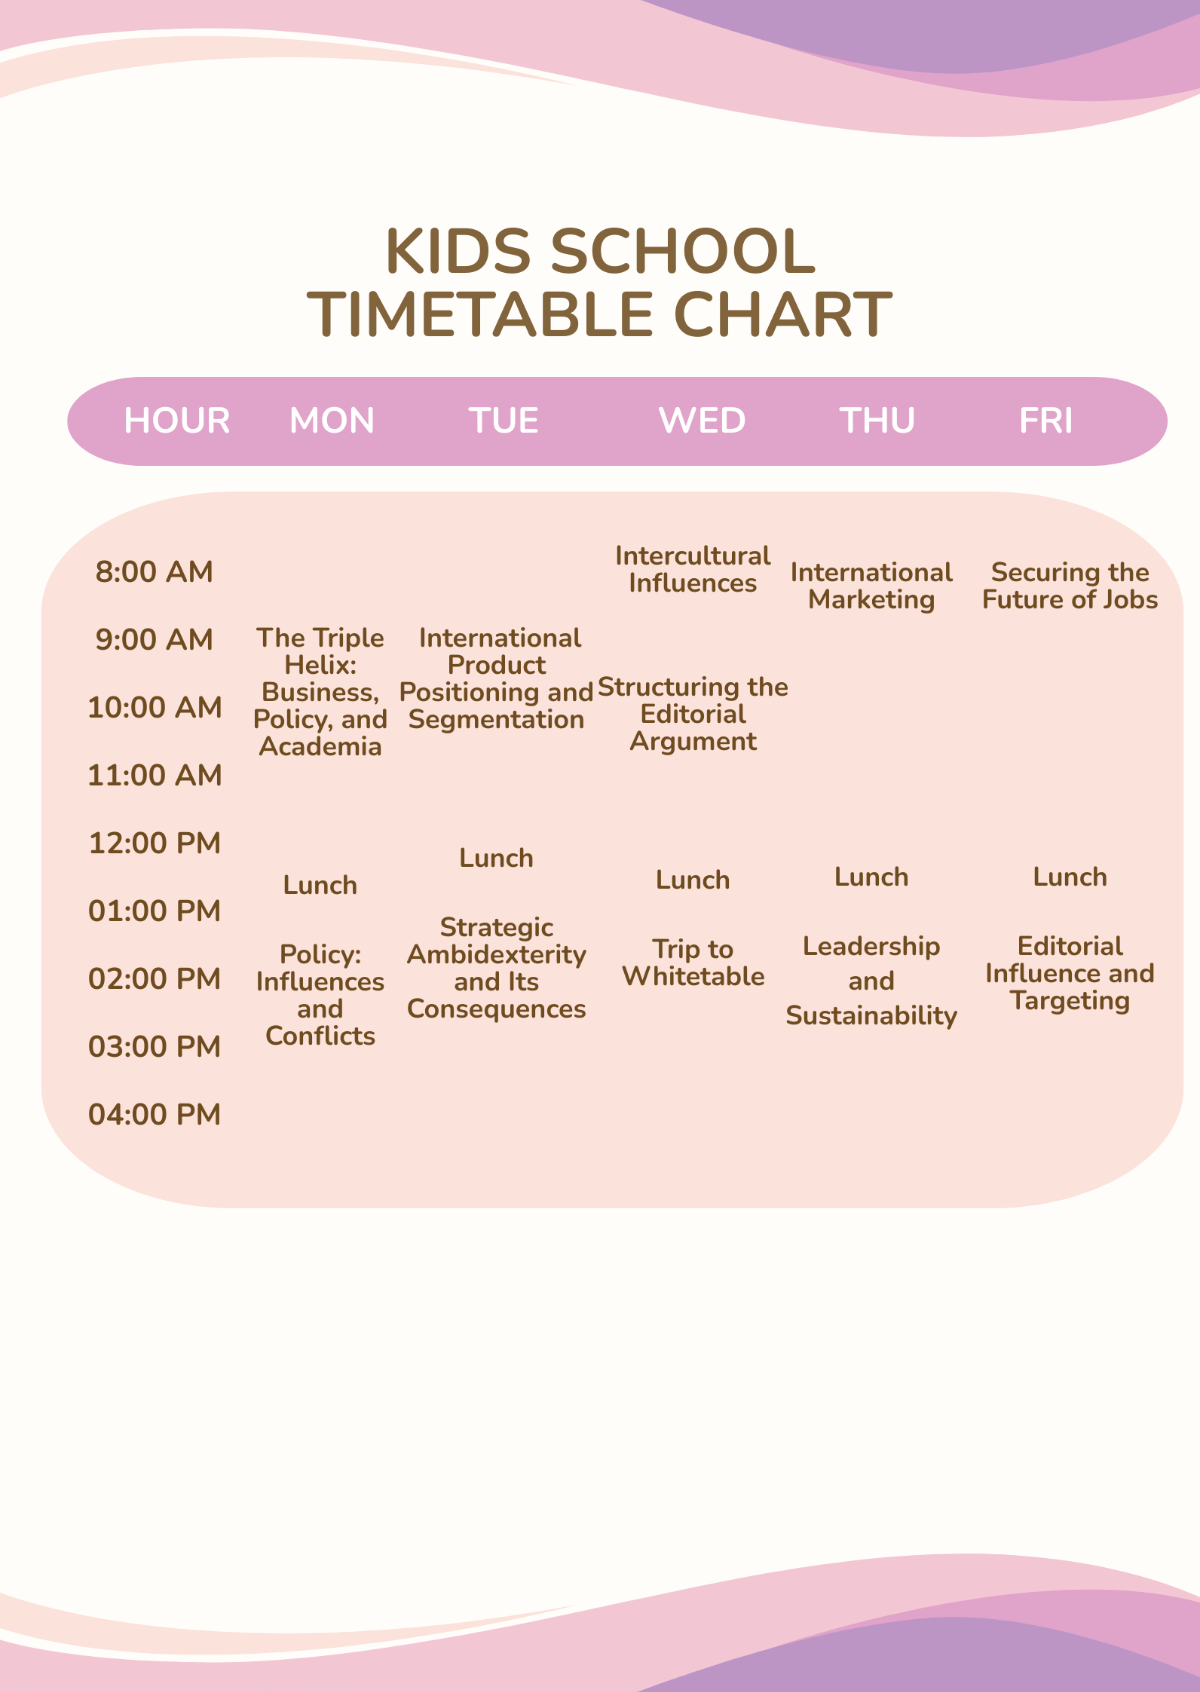 Free Business School Timetable Chart Template